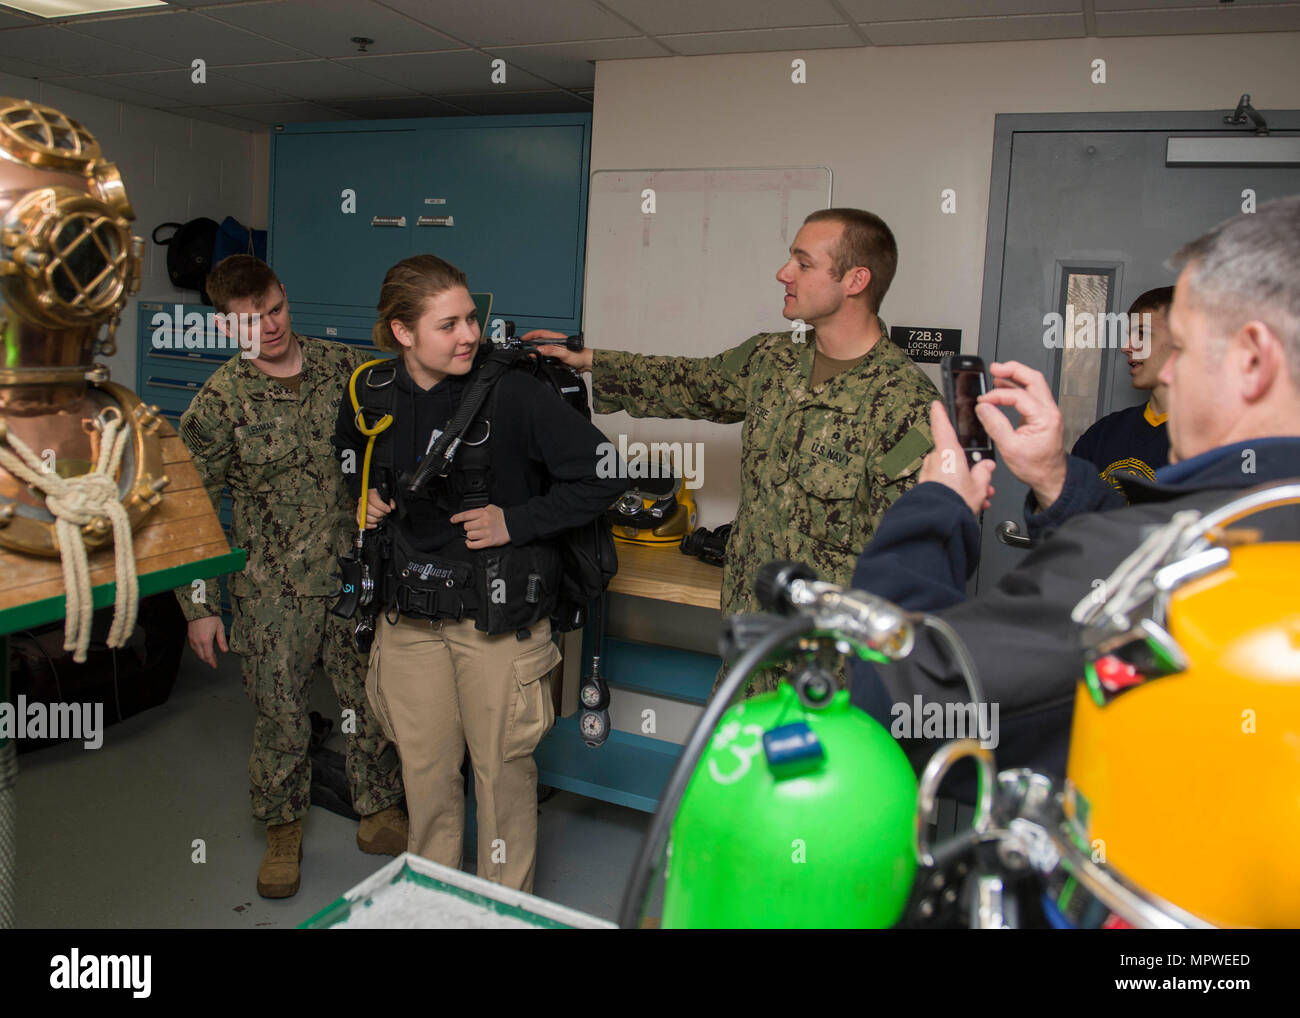 140420-N-LQ926-092 EVERETT, Wash. (April 20, 2017) Navy Diver 2nd Class Eric J. Lehman (Left) and Navy Diver 2nd Class Justin R. Rivere, assigned to the Puget Sound Navy Shipyard and Intermediate Maintenance Facility dive locker, demonstrate the weight of a self contained underwater breathing apparatus (SCUBA) during a Burlington-Edison High School Navy Junior Recruit Officer Training Command (JROTC) visit to the Navy dive locker at Naval Station Everett (NSE). While aboard NSE the Burlington-Edison High School JROTC toured the Navy dive locker, received a briefing on the use of a hyperbaric c Stock Photo